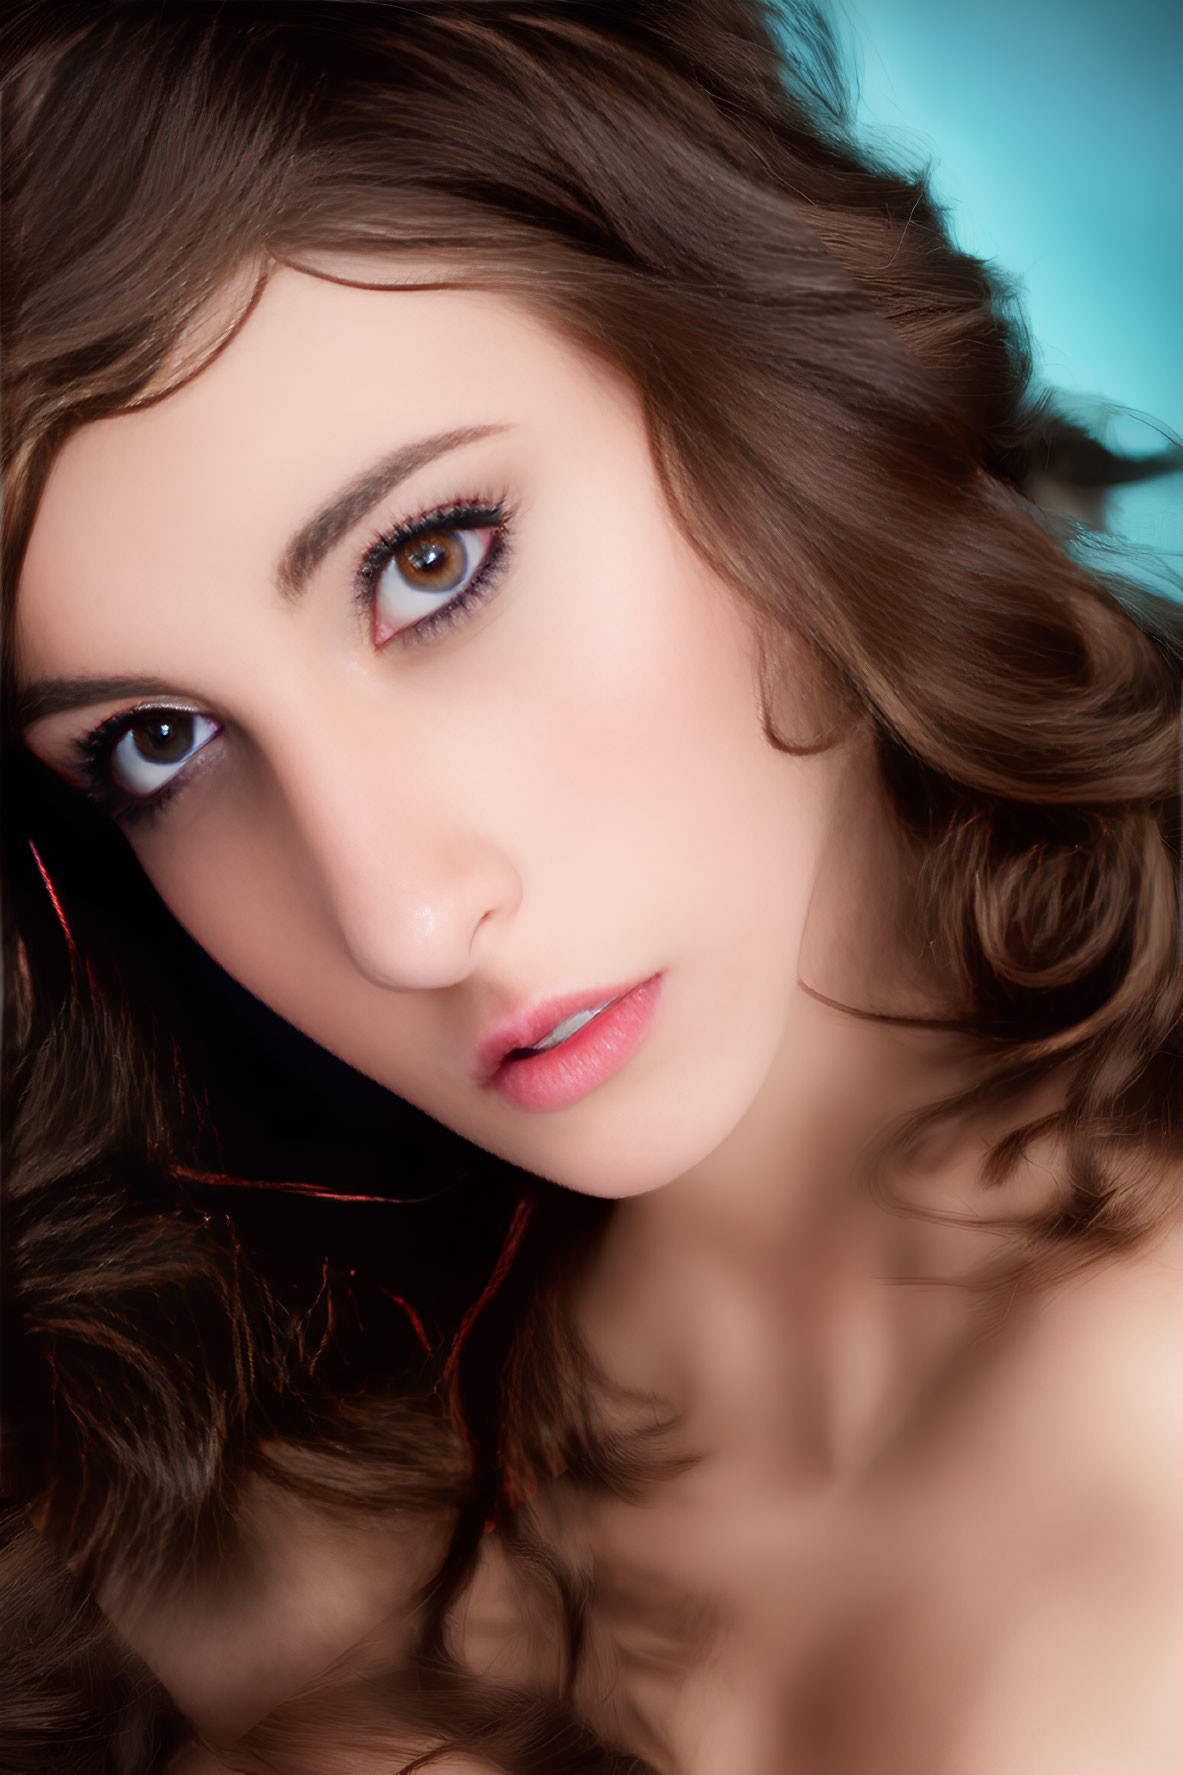 Portrait of Woman with Wavy Brown Hair and Intense Eyes on Blue Background